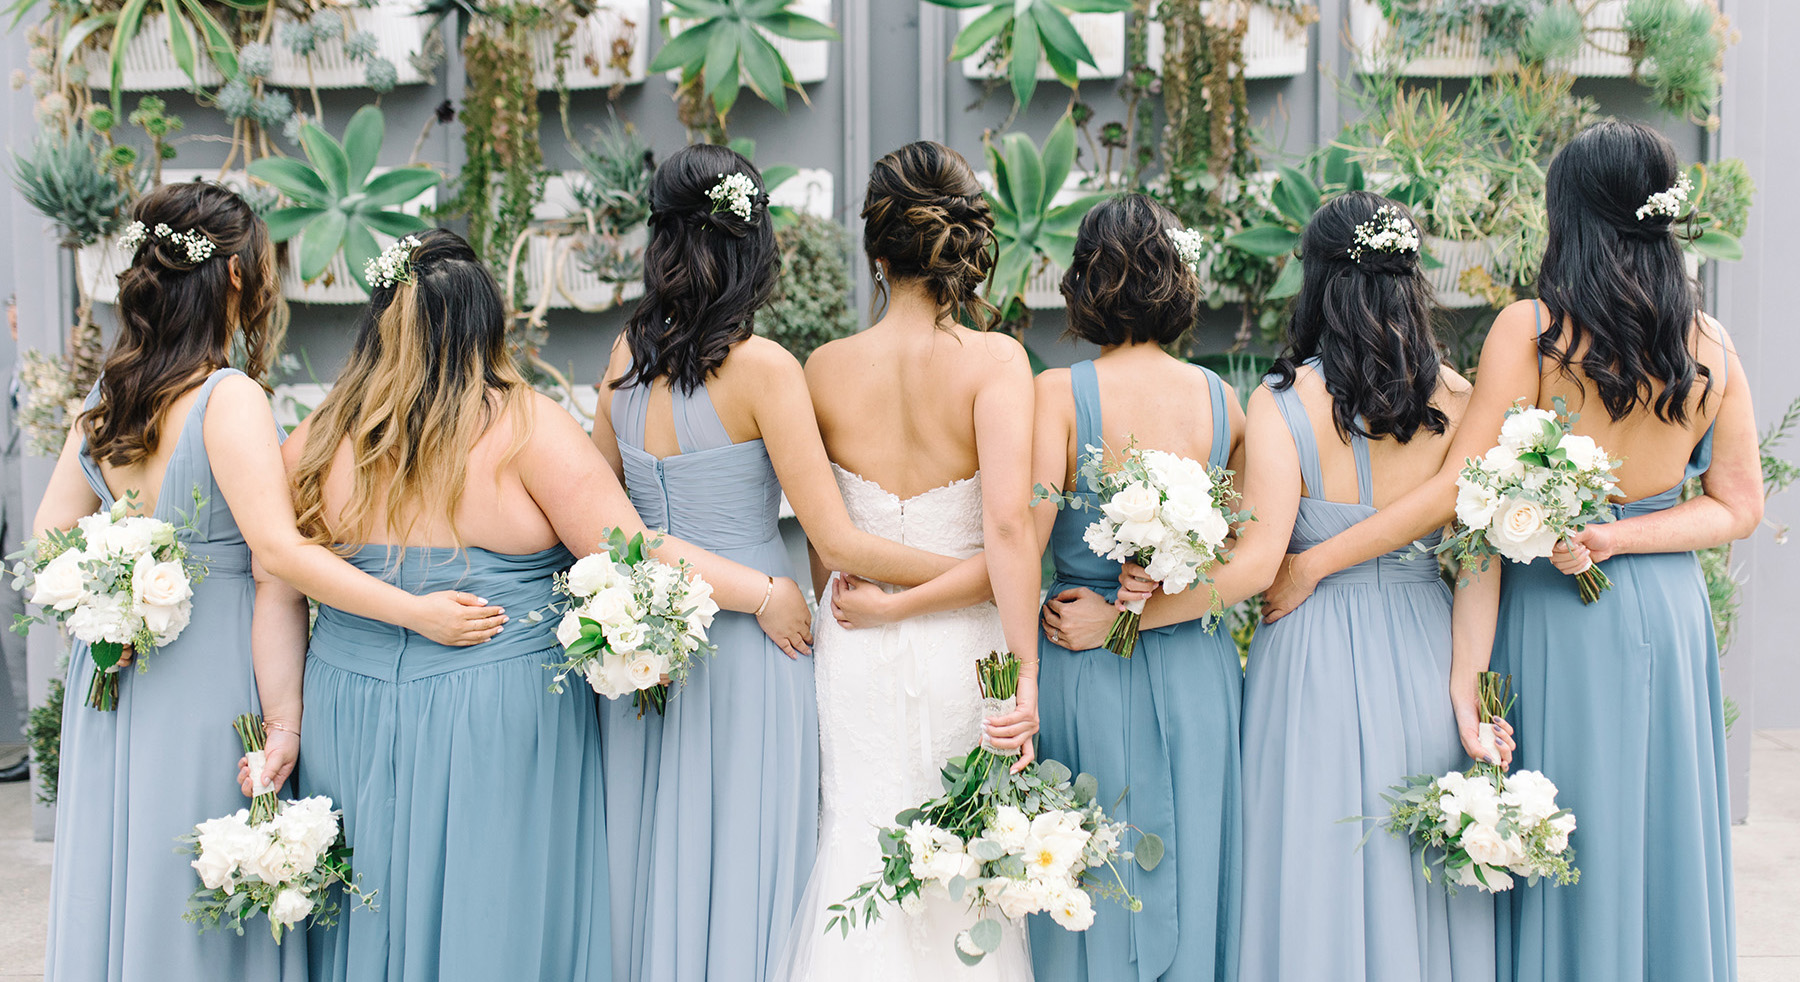 Bride and bridesmaids standing next to each other and facing away from the camera